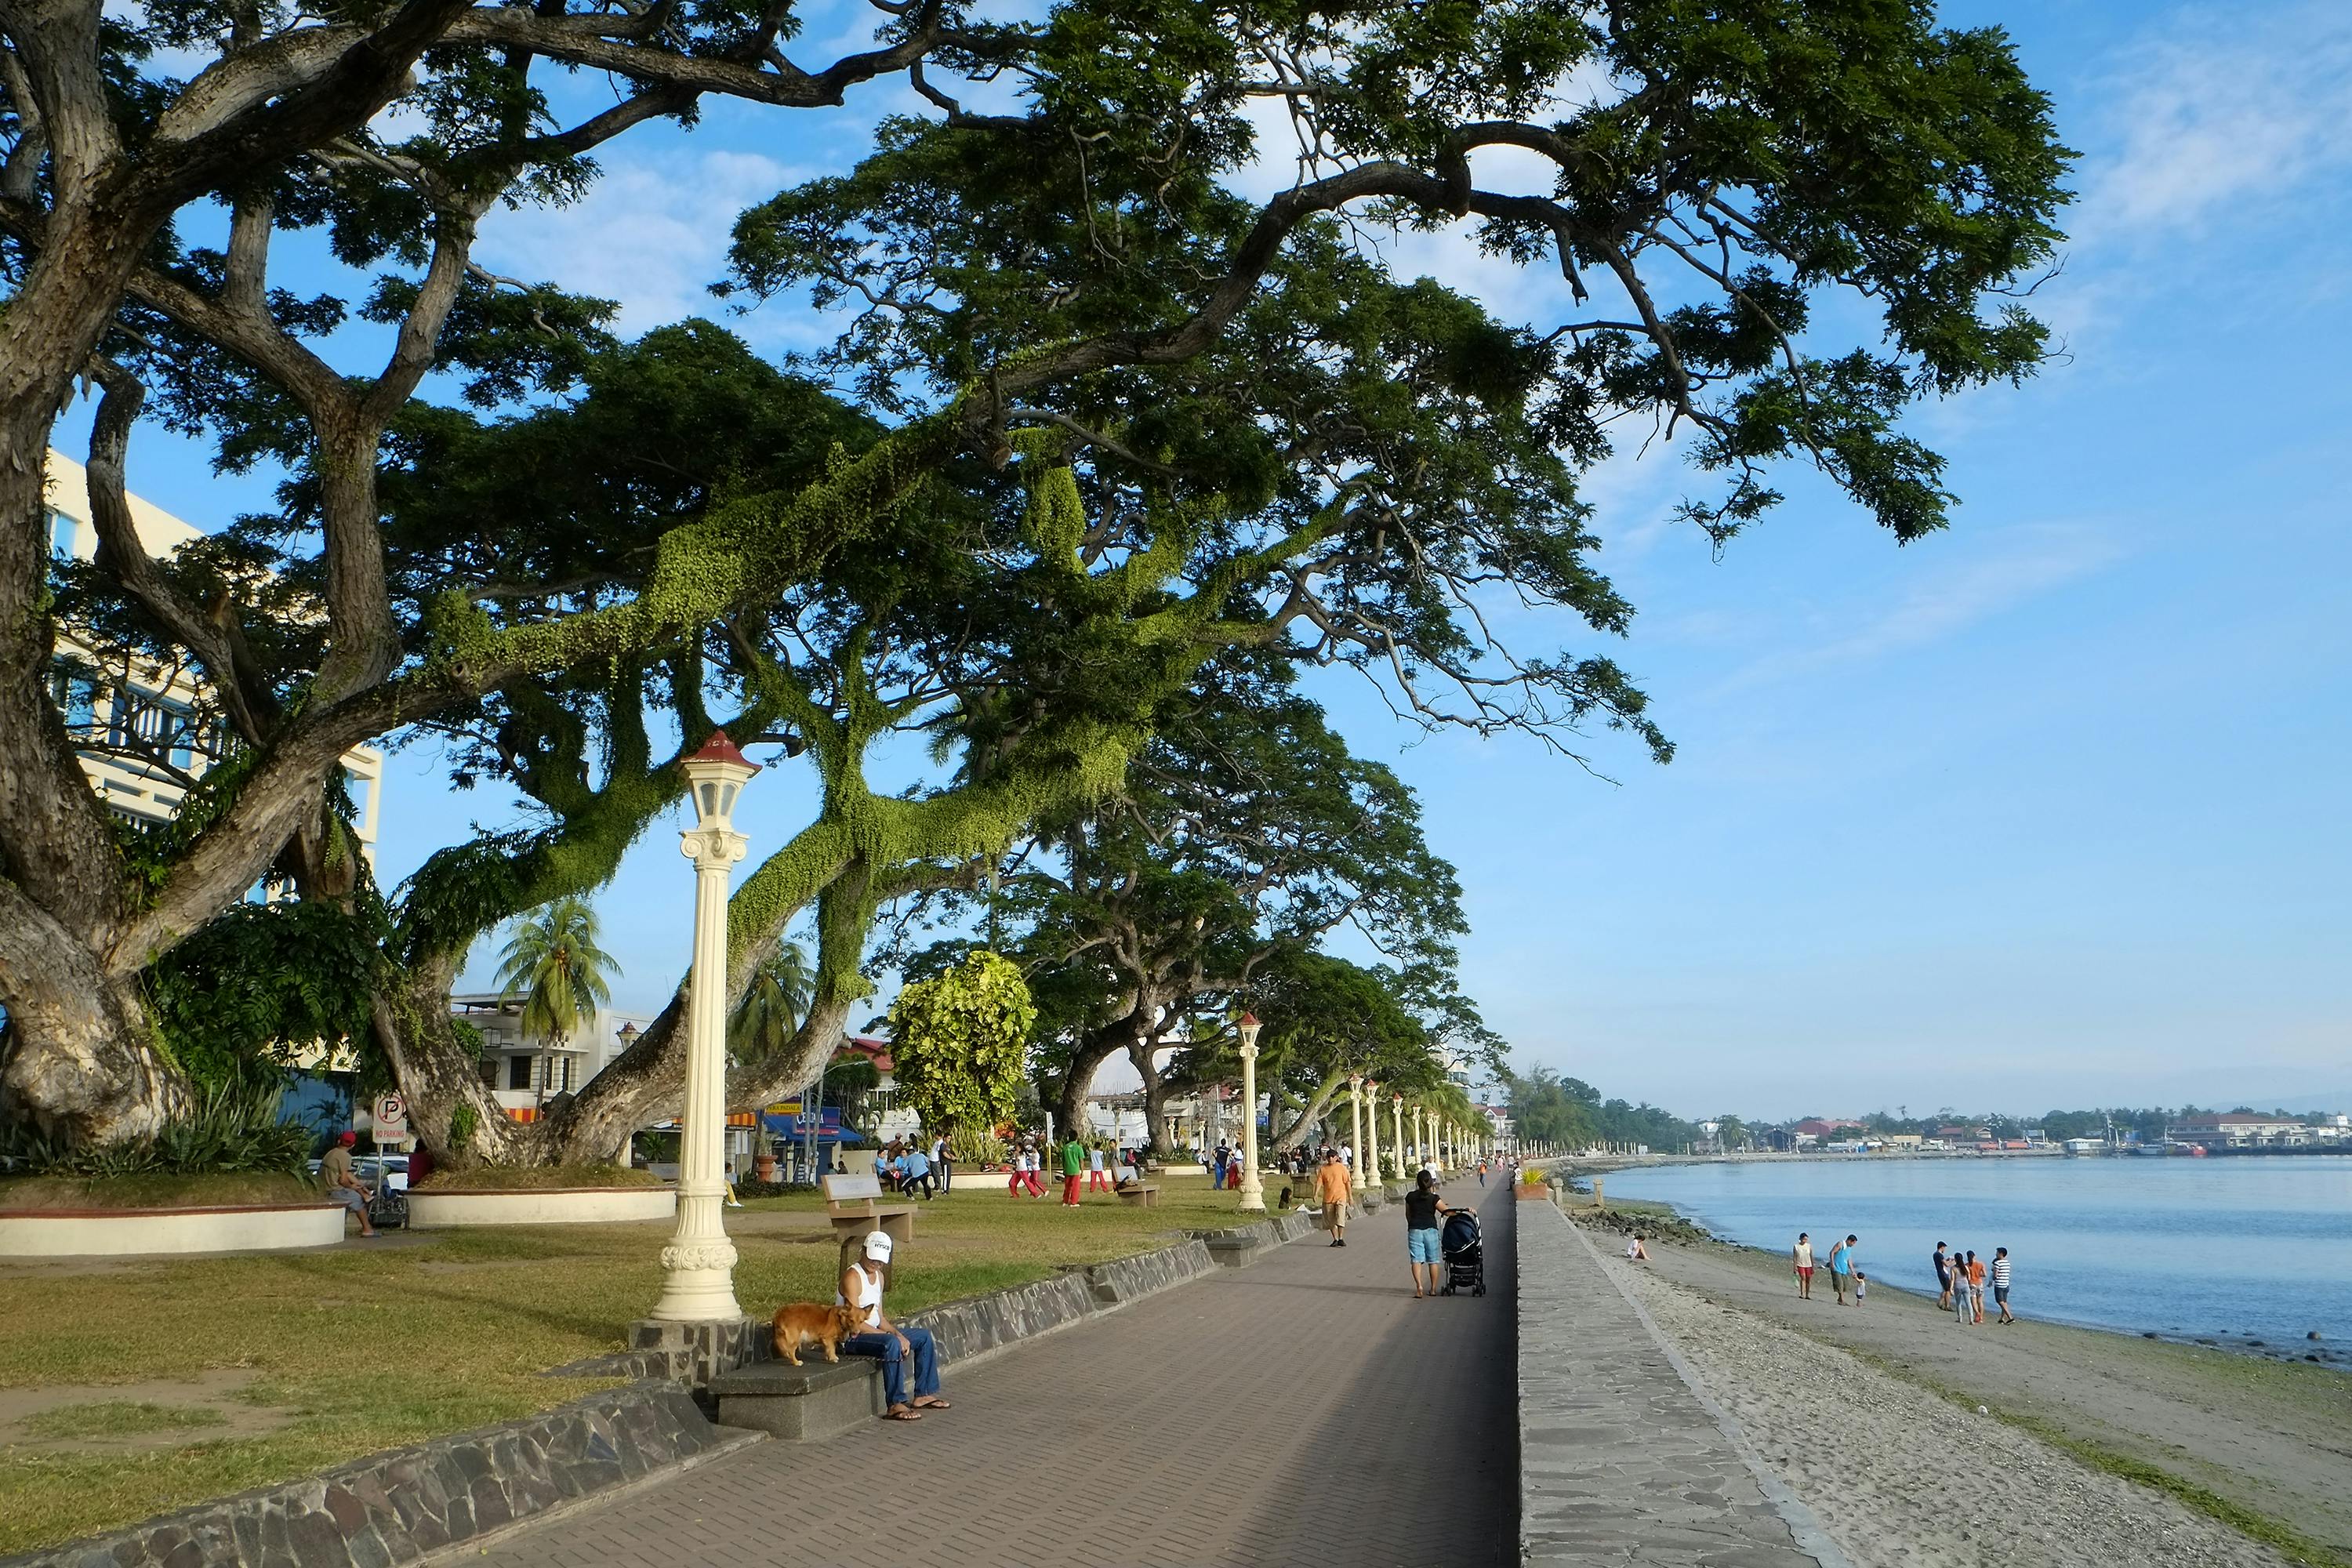 People relaxing in the benches of Rizal Boulevard in Dumaguete